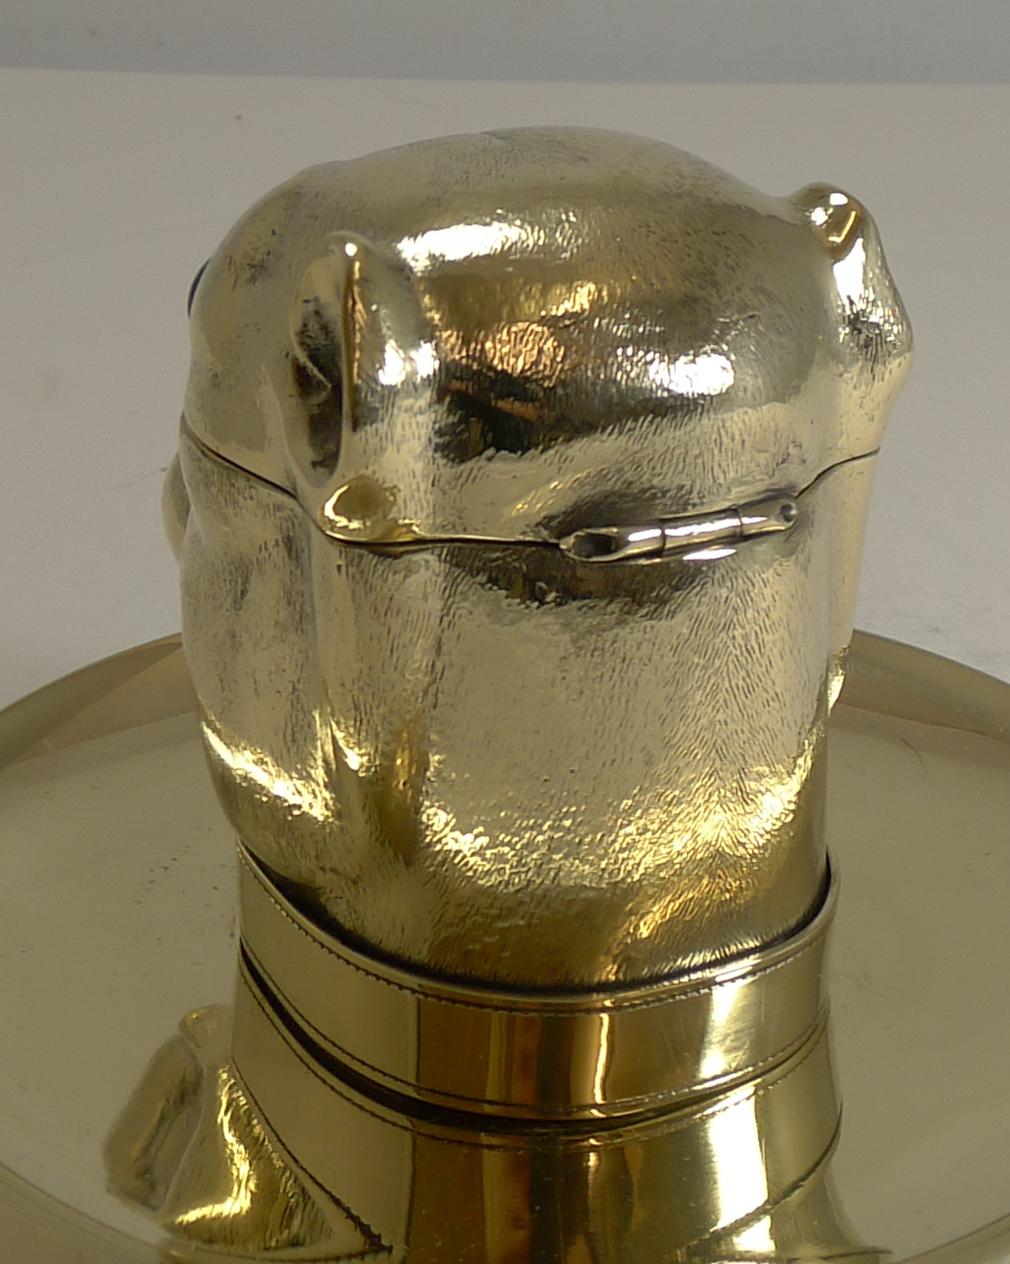 A magnificent English Victorian inkwell made from solid English brass having been professionally polished to gleam.

This grand figural dog inkwell was modelled in the form of an English Bulldog's head with a buckled collar and retaining his two